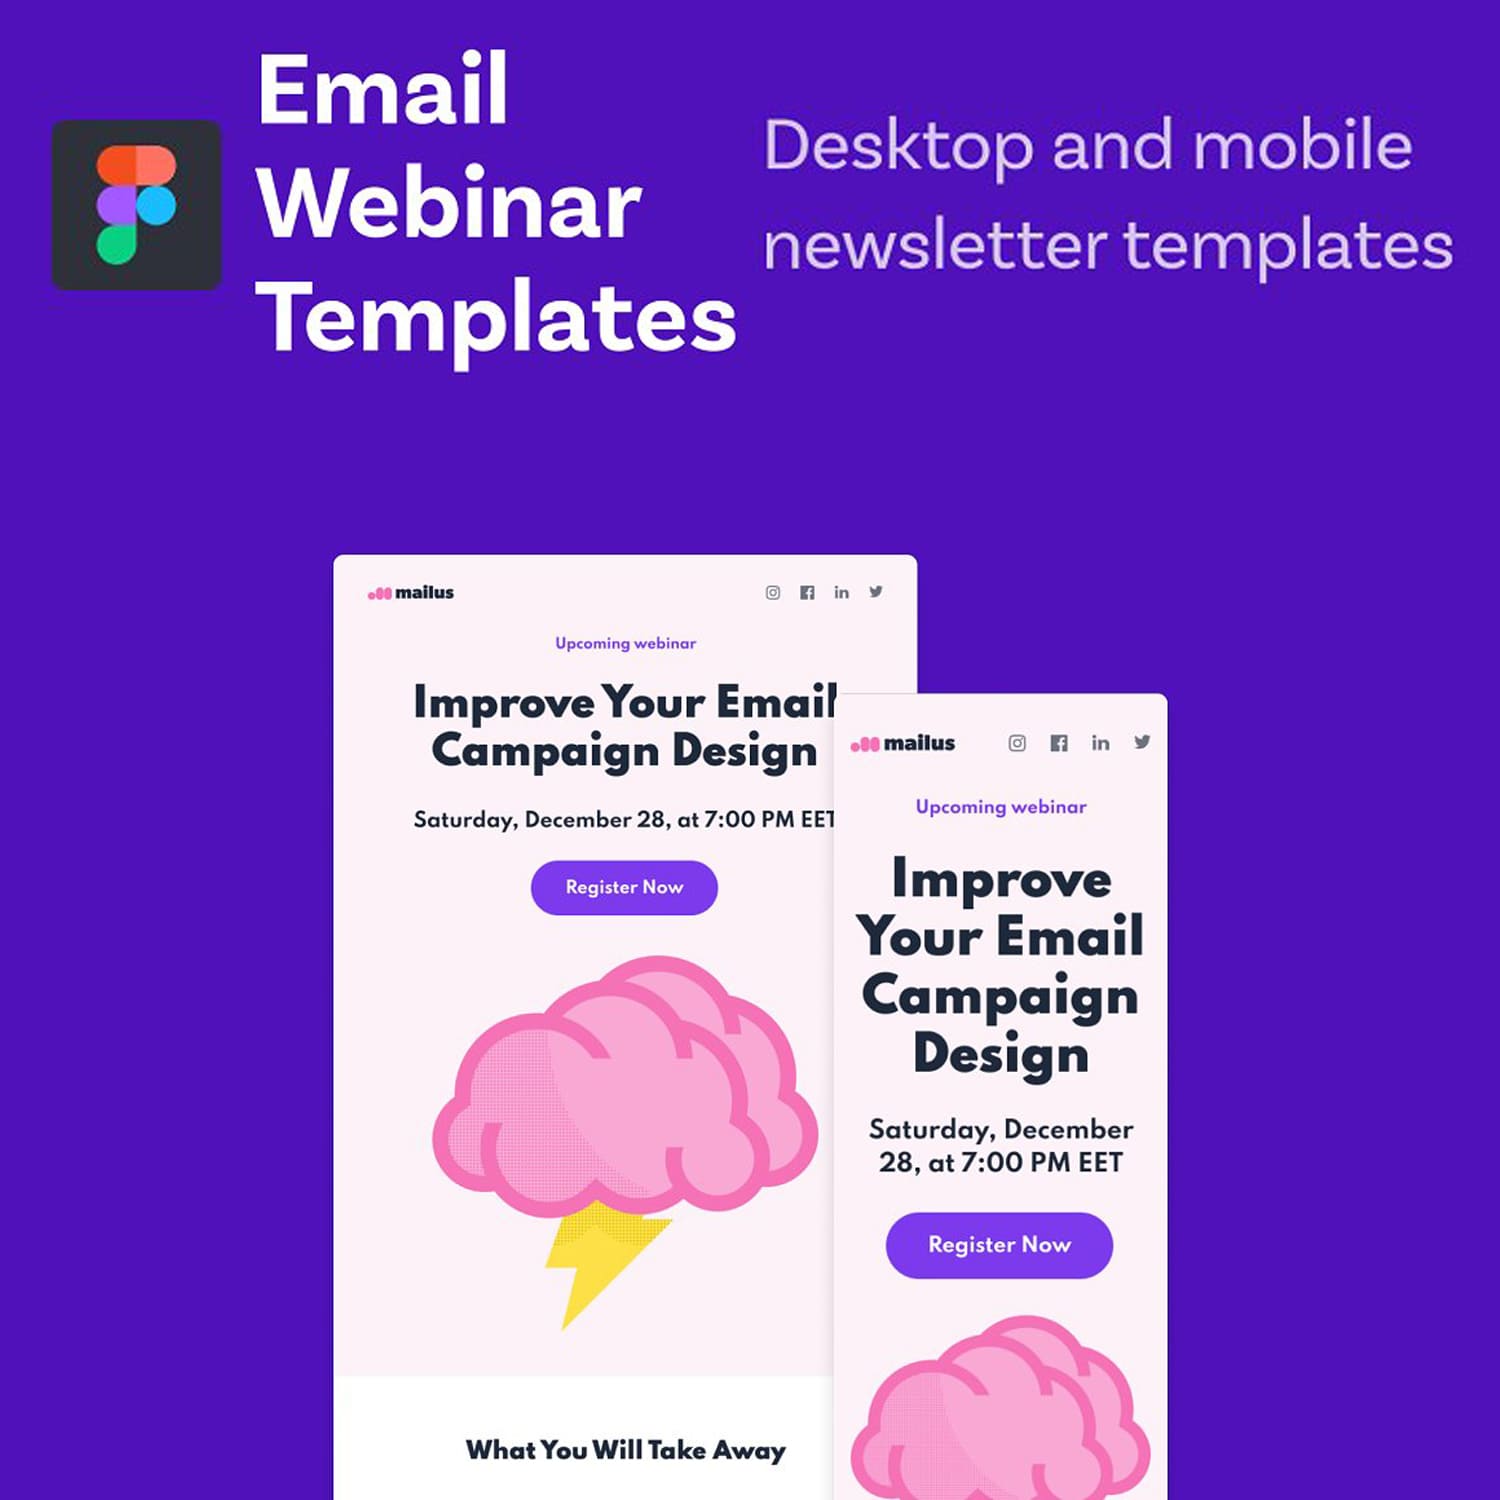 Email Templates (Webinar) Cover.